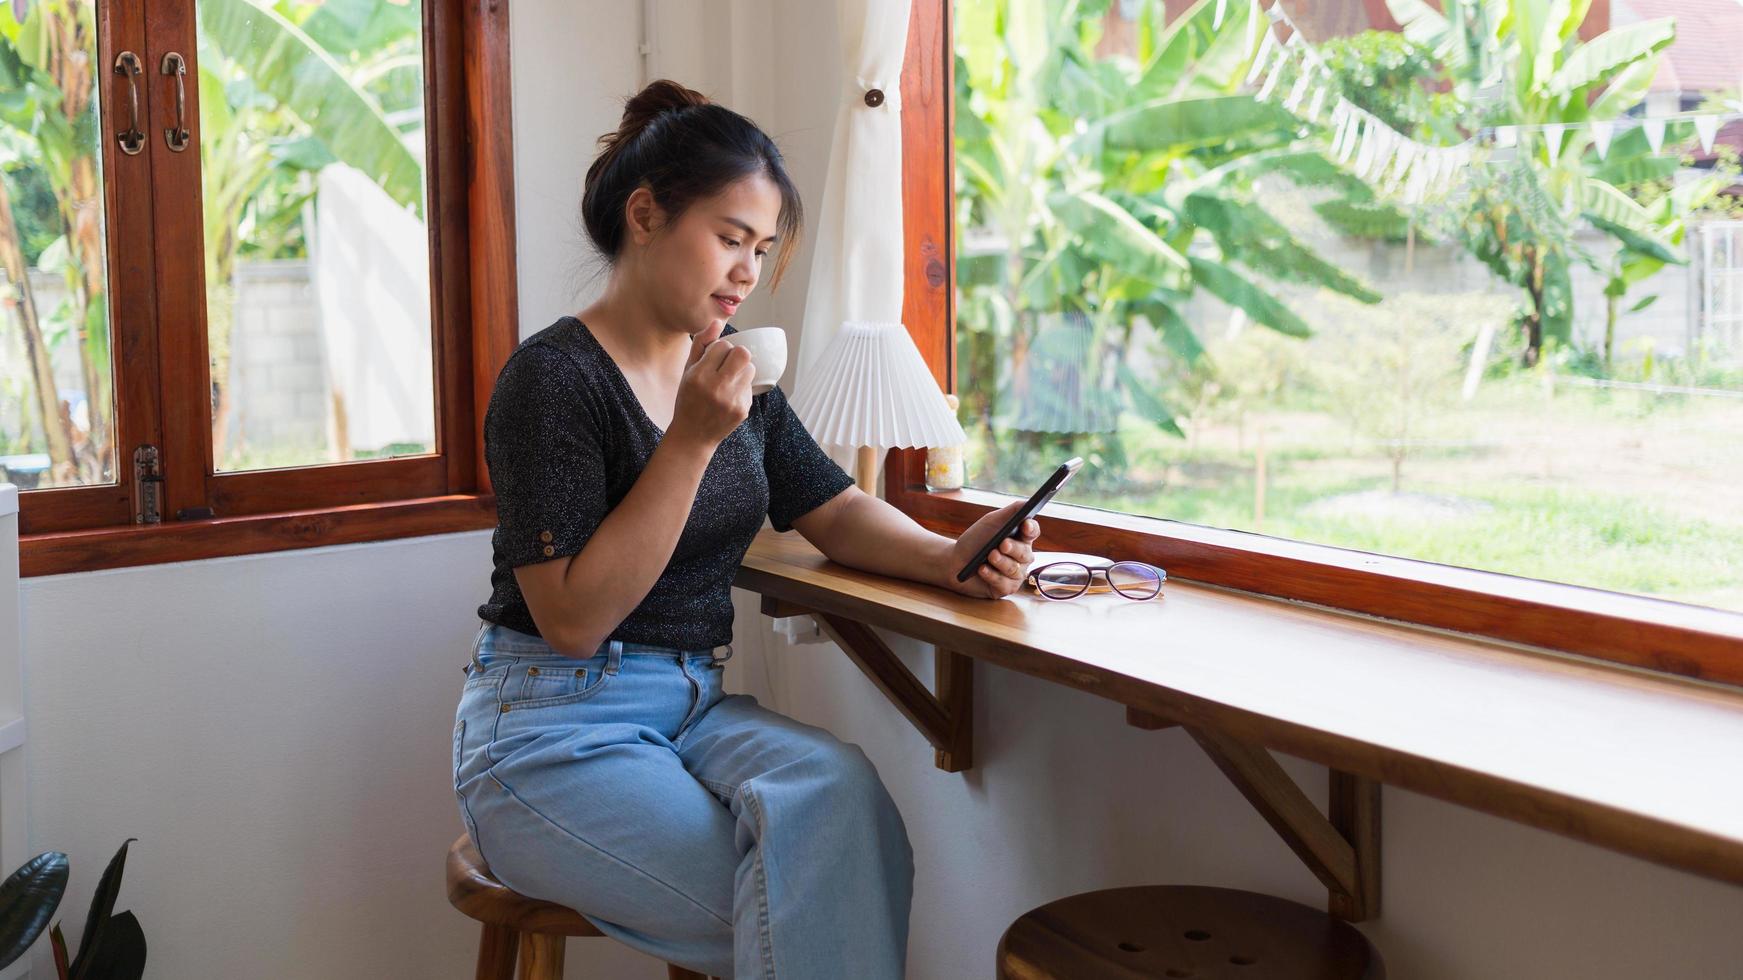 Asian woman with a beautiful smile watching on mobile phone during rest in a coffee shop, happy Thailand female sit at wooden bar counter drinking coffee relaxing in cafe during free time photo